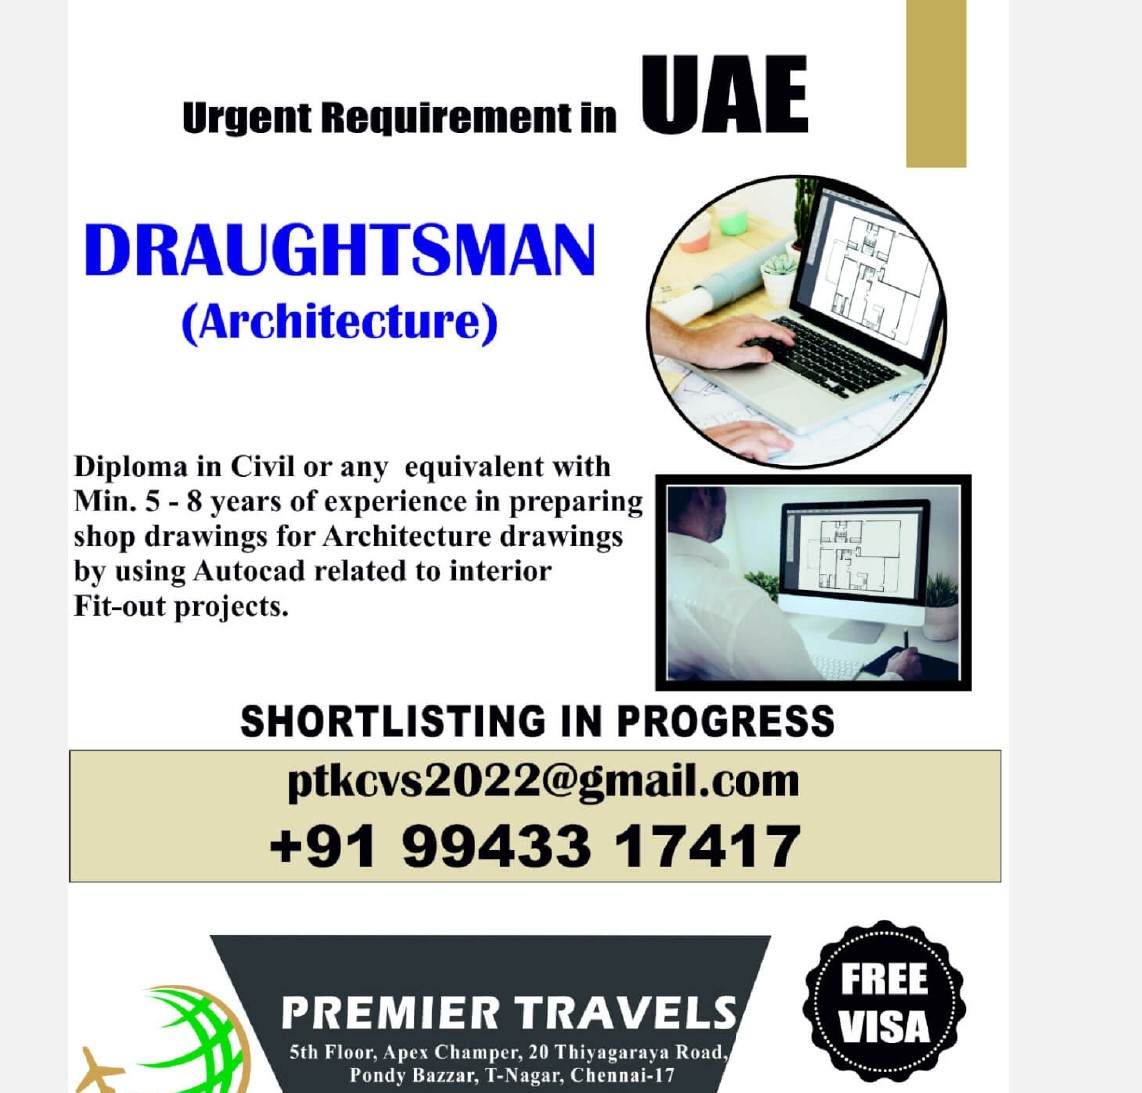 Required Draughtsman for UAE